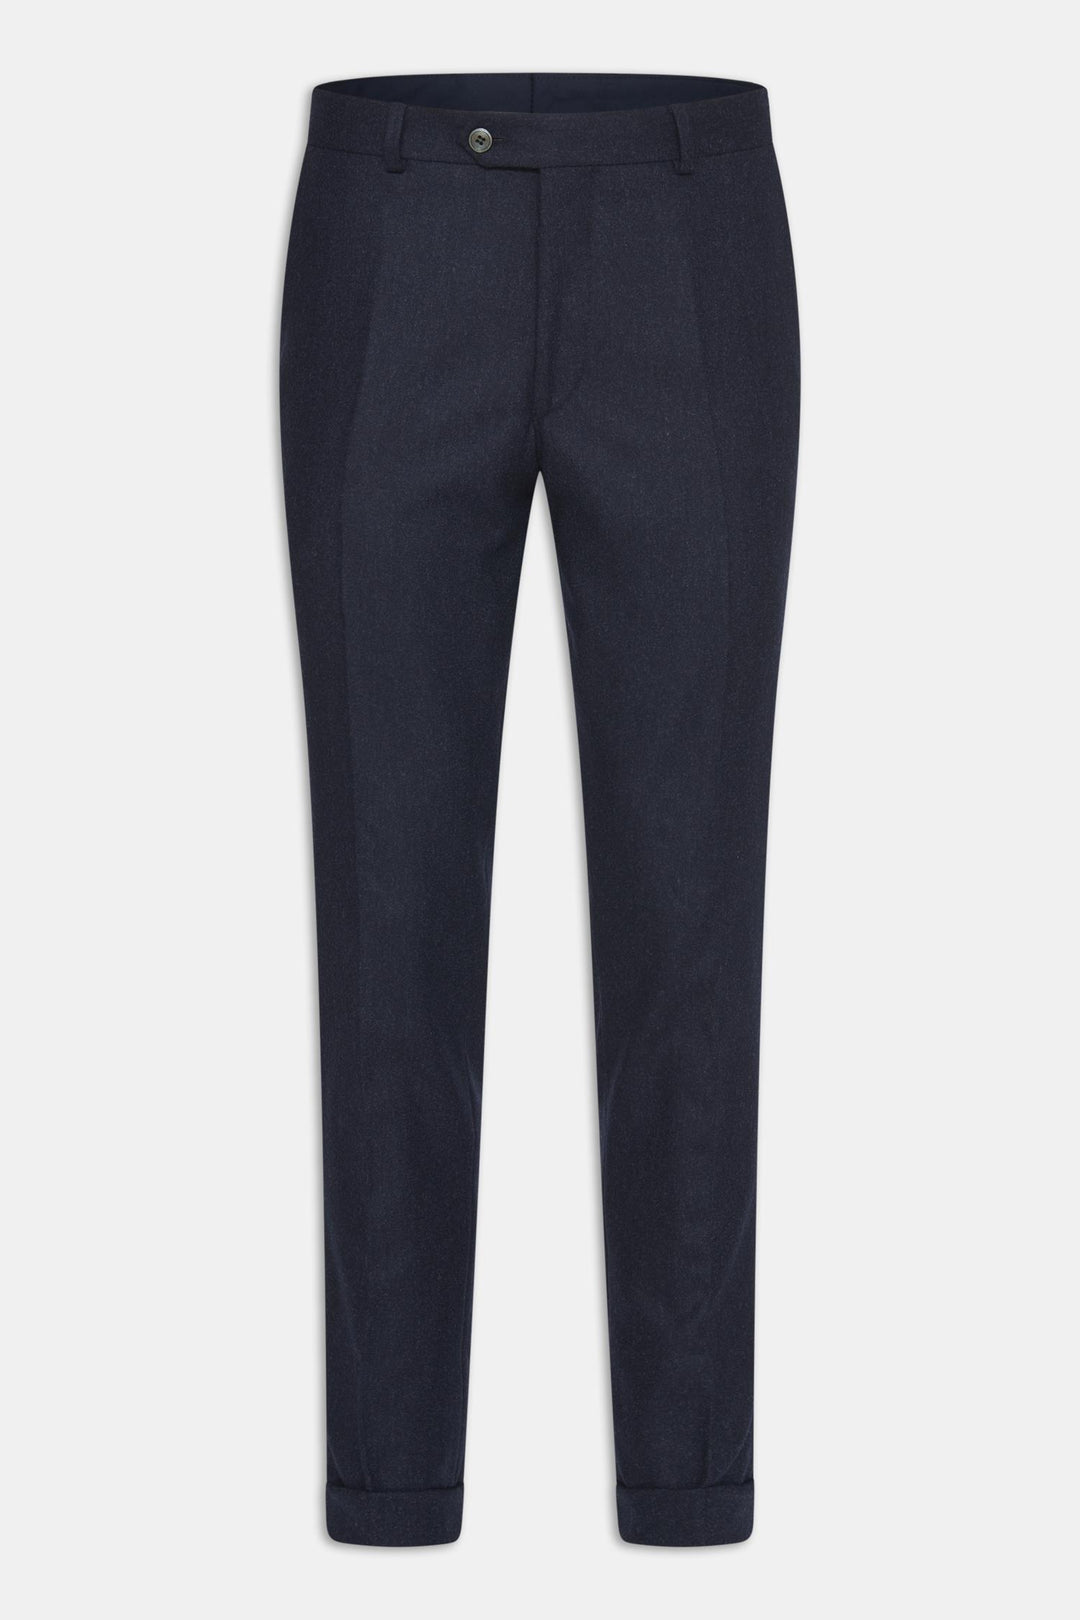 OSCAR JACOBSON - DENZ TURN UP TROUSERS - Dale